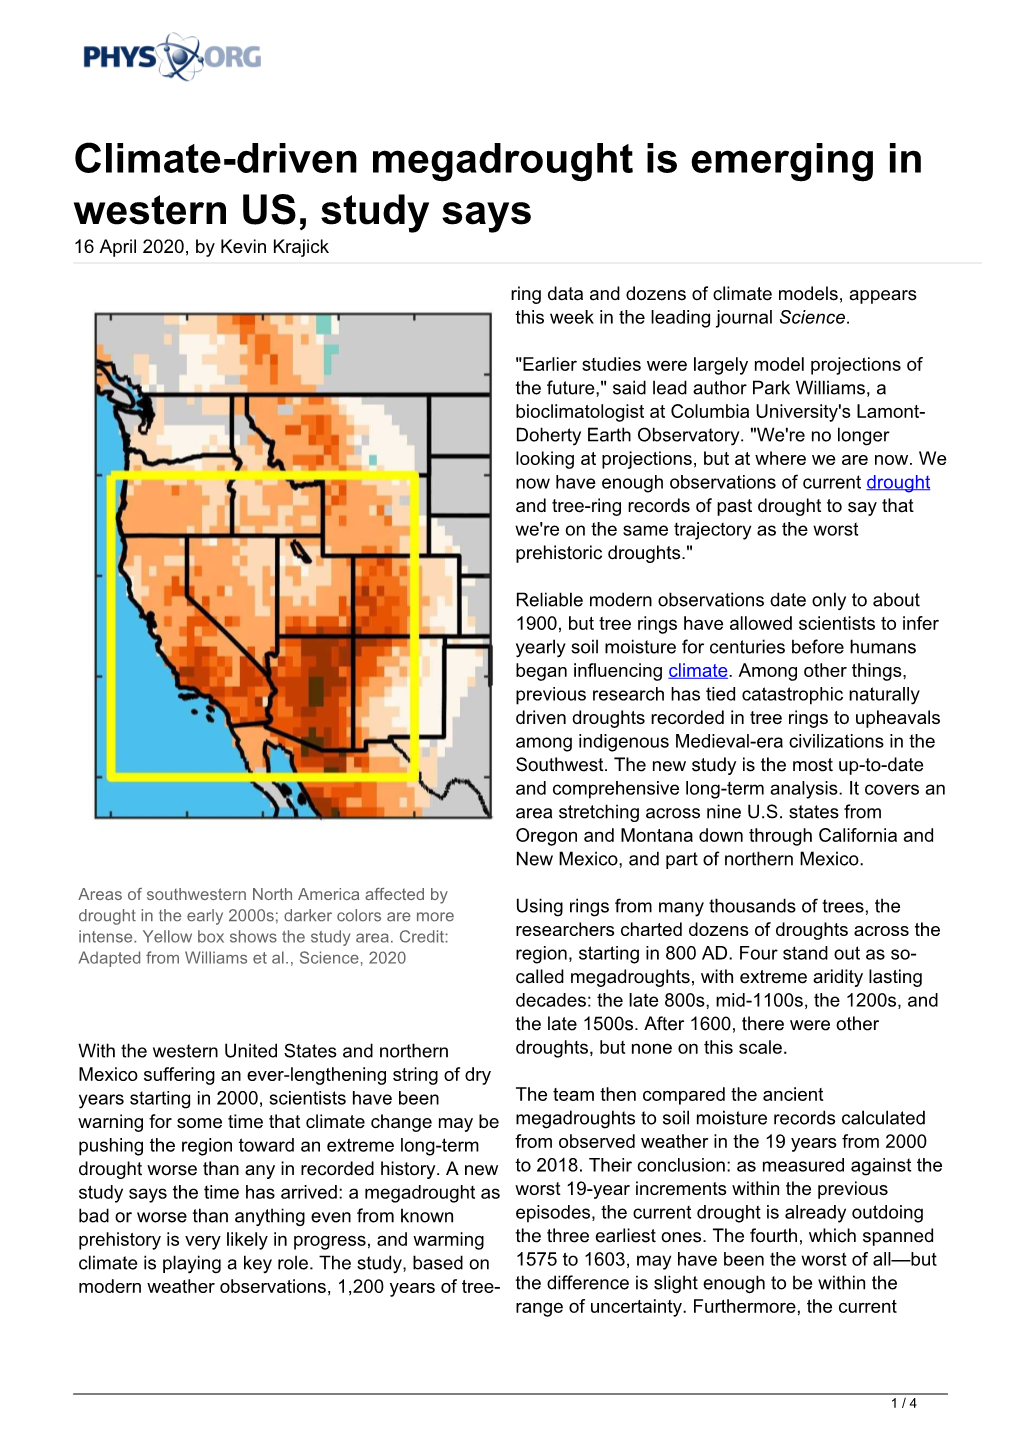 Climate-Driven Megadrought Is Emerging in Western US, Study Says 16 April 2020, by Kevin Krajick